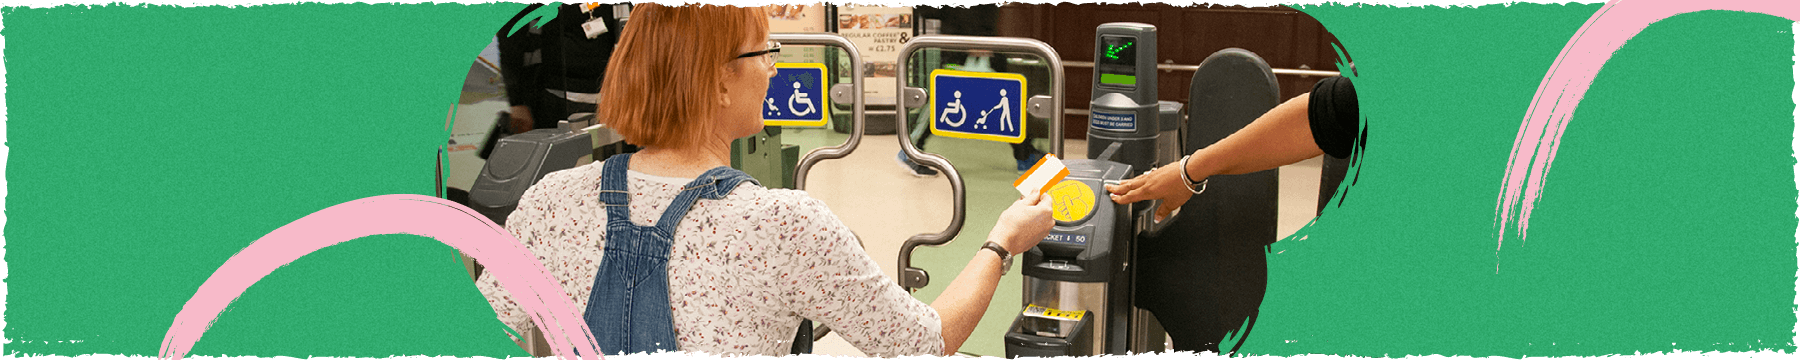 Wheelchair assisted passenger using a gateline